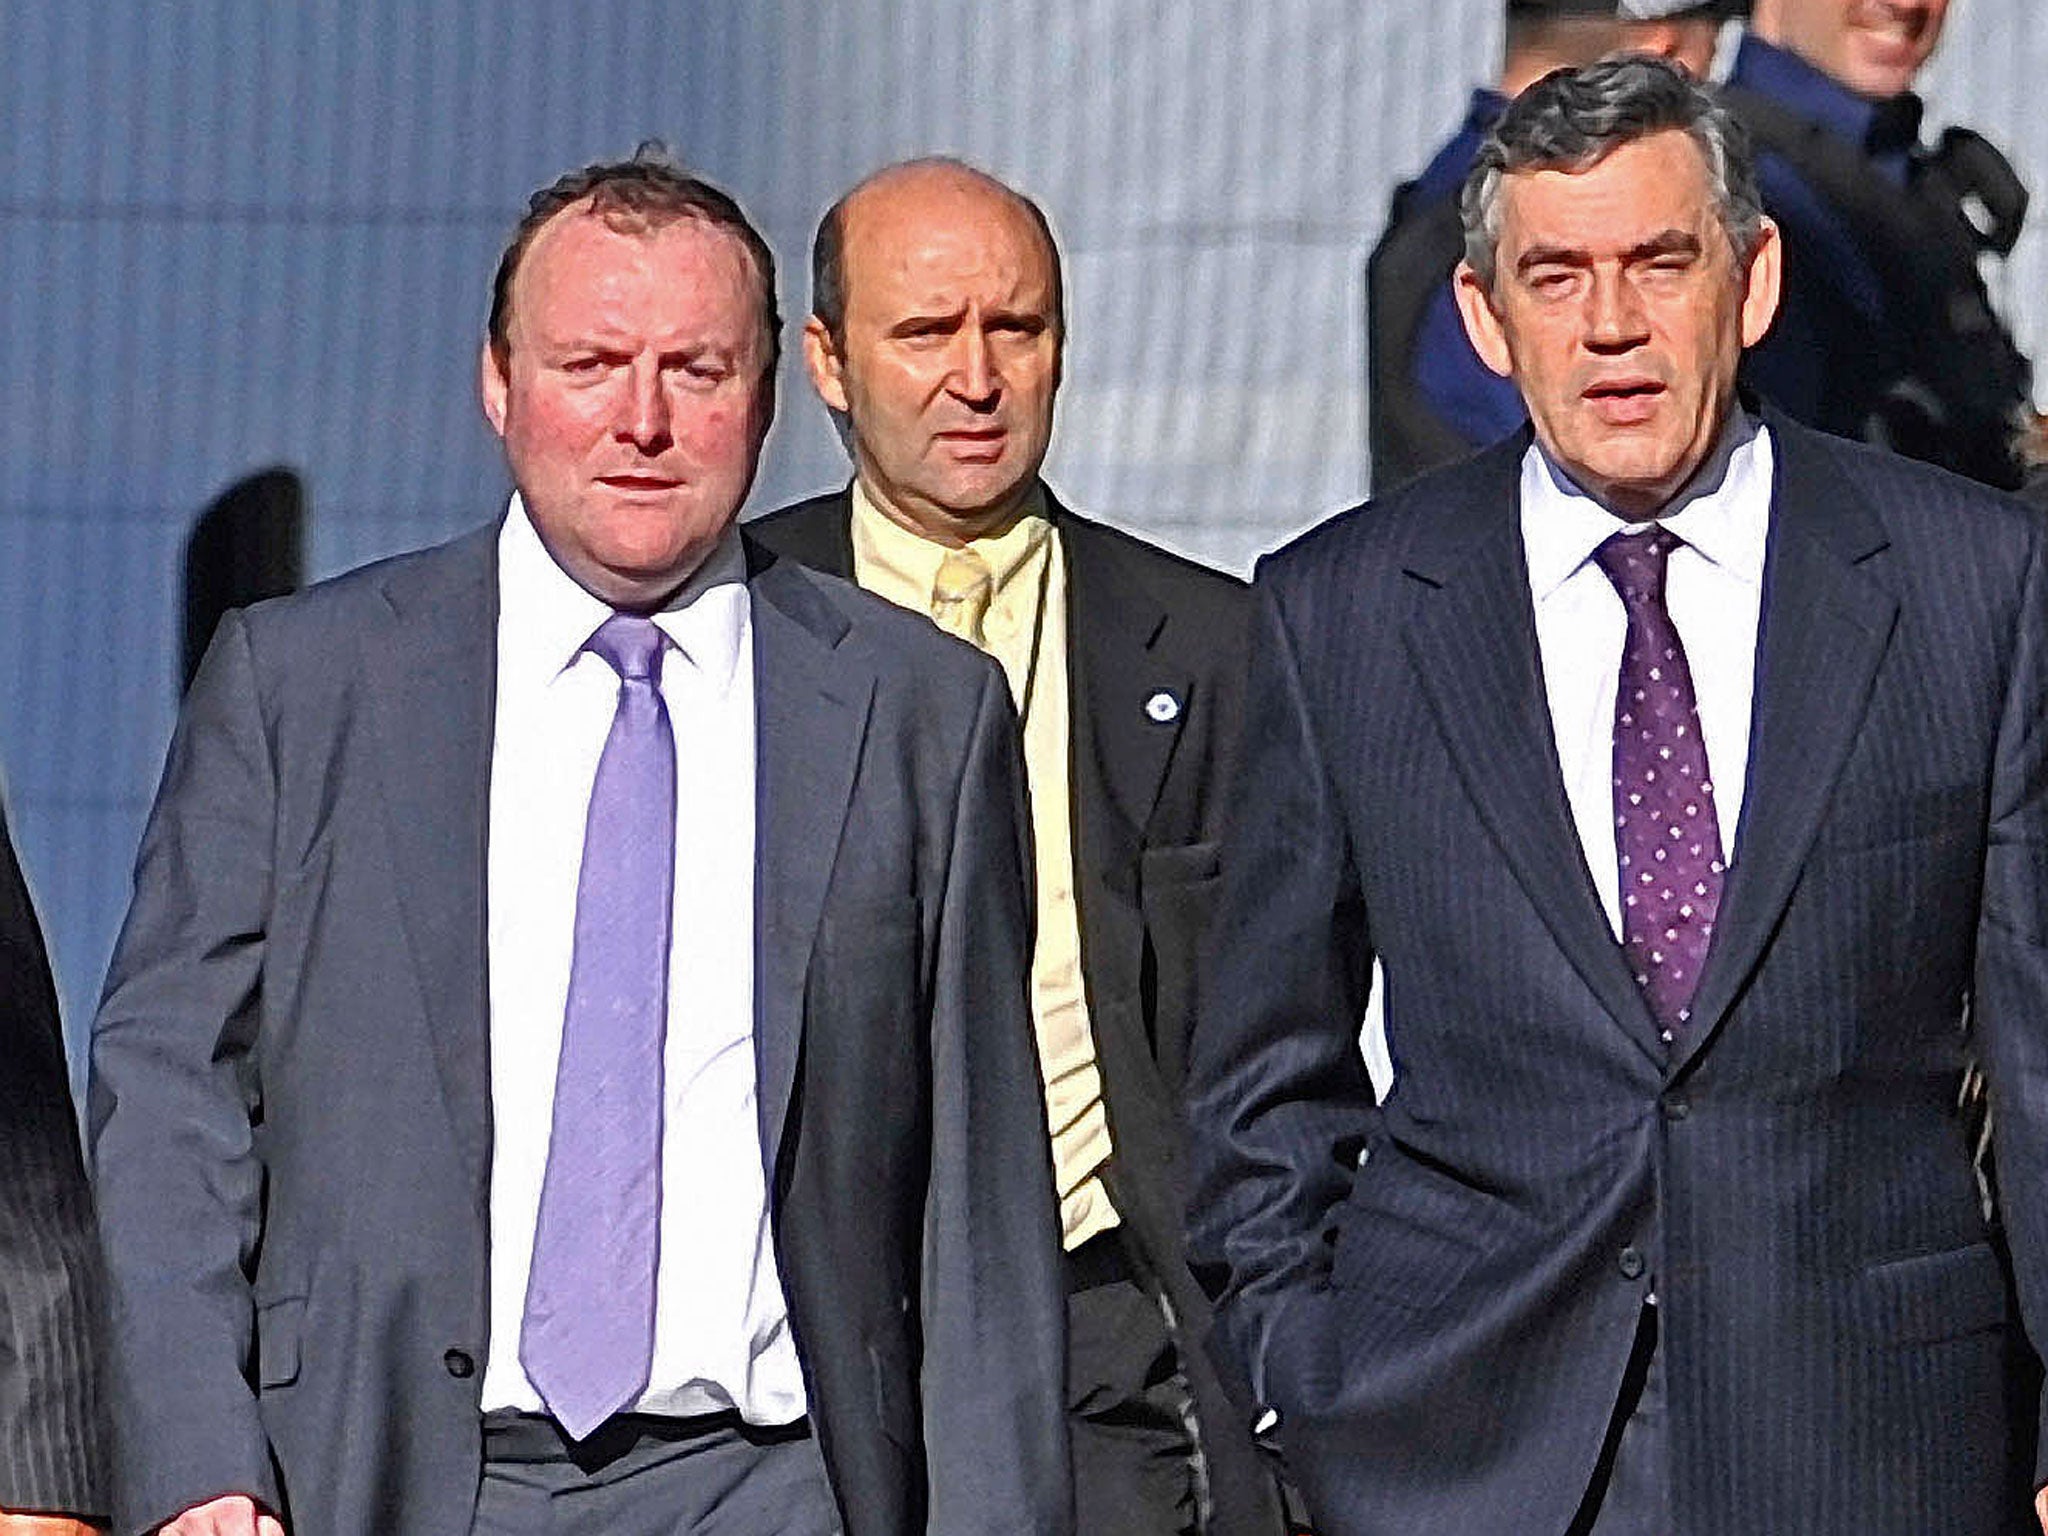 The police were urged on Sunday night to investigate claims that Damian McBride, left, Gordon Brown’s disgraced spin-doctor, could have broken the law by leaking confidential government information